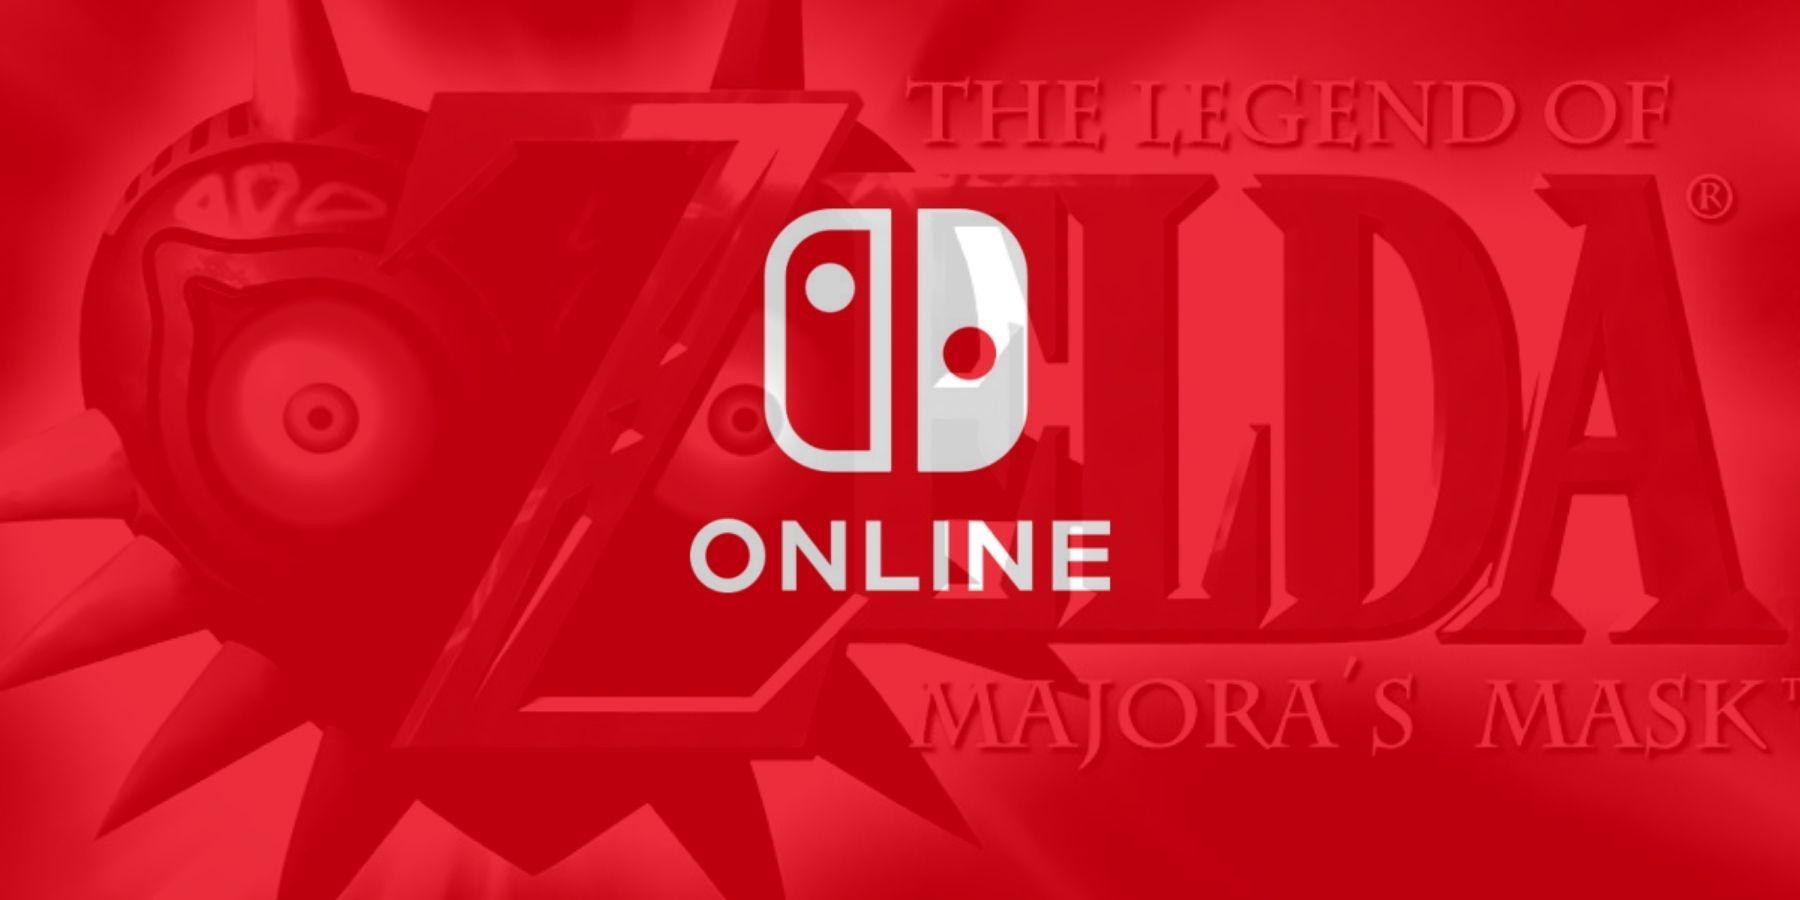 Why Nintendo Switch Online Might Not Be The Best Platform for Majoras Mask